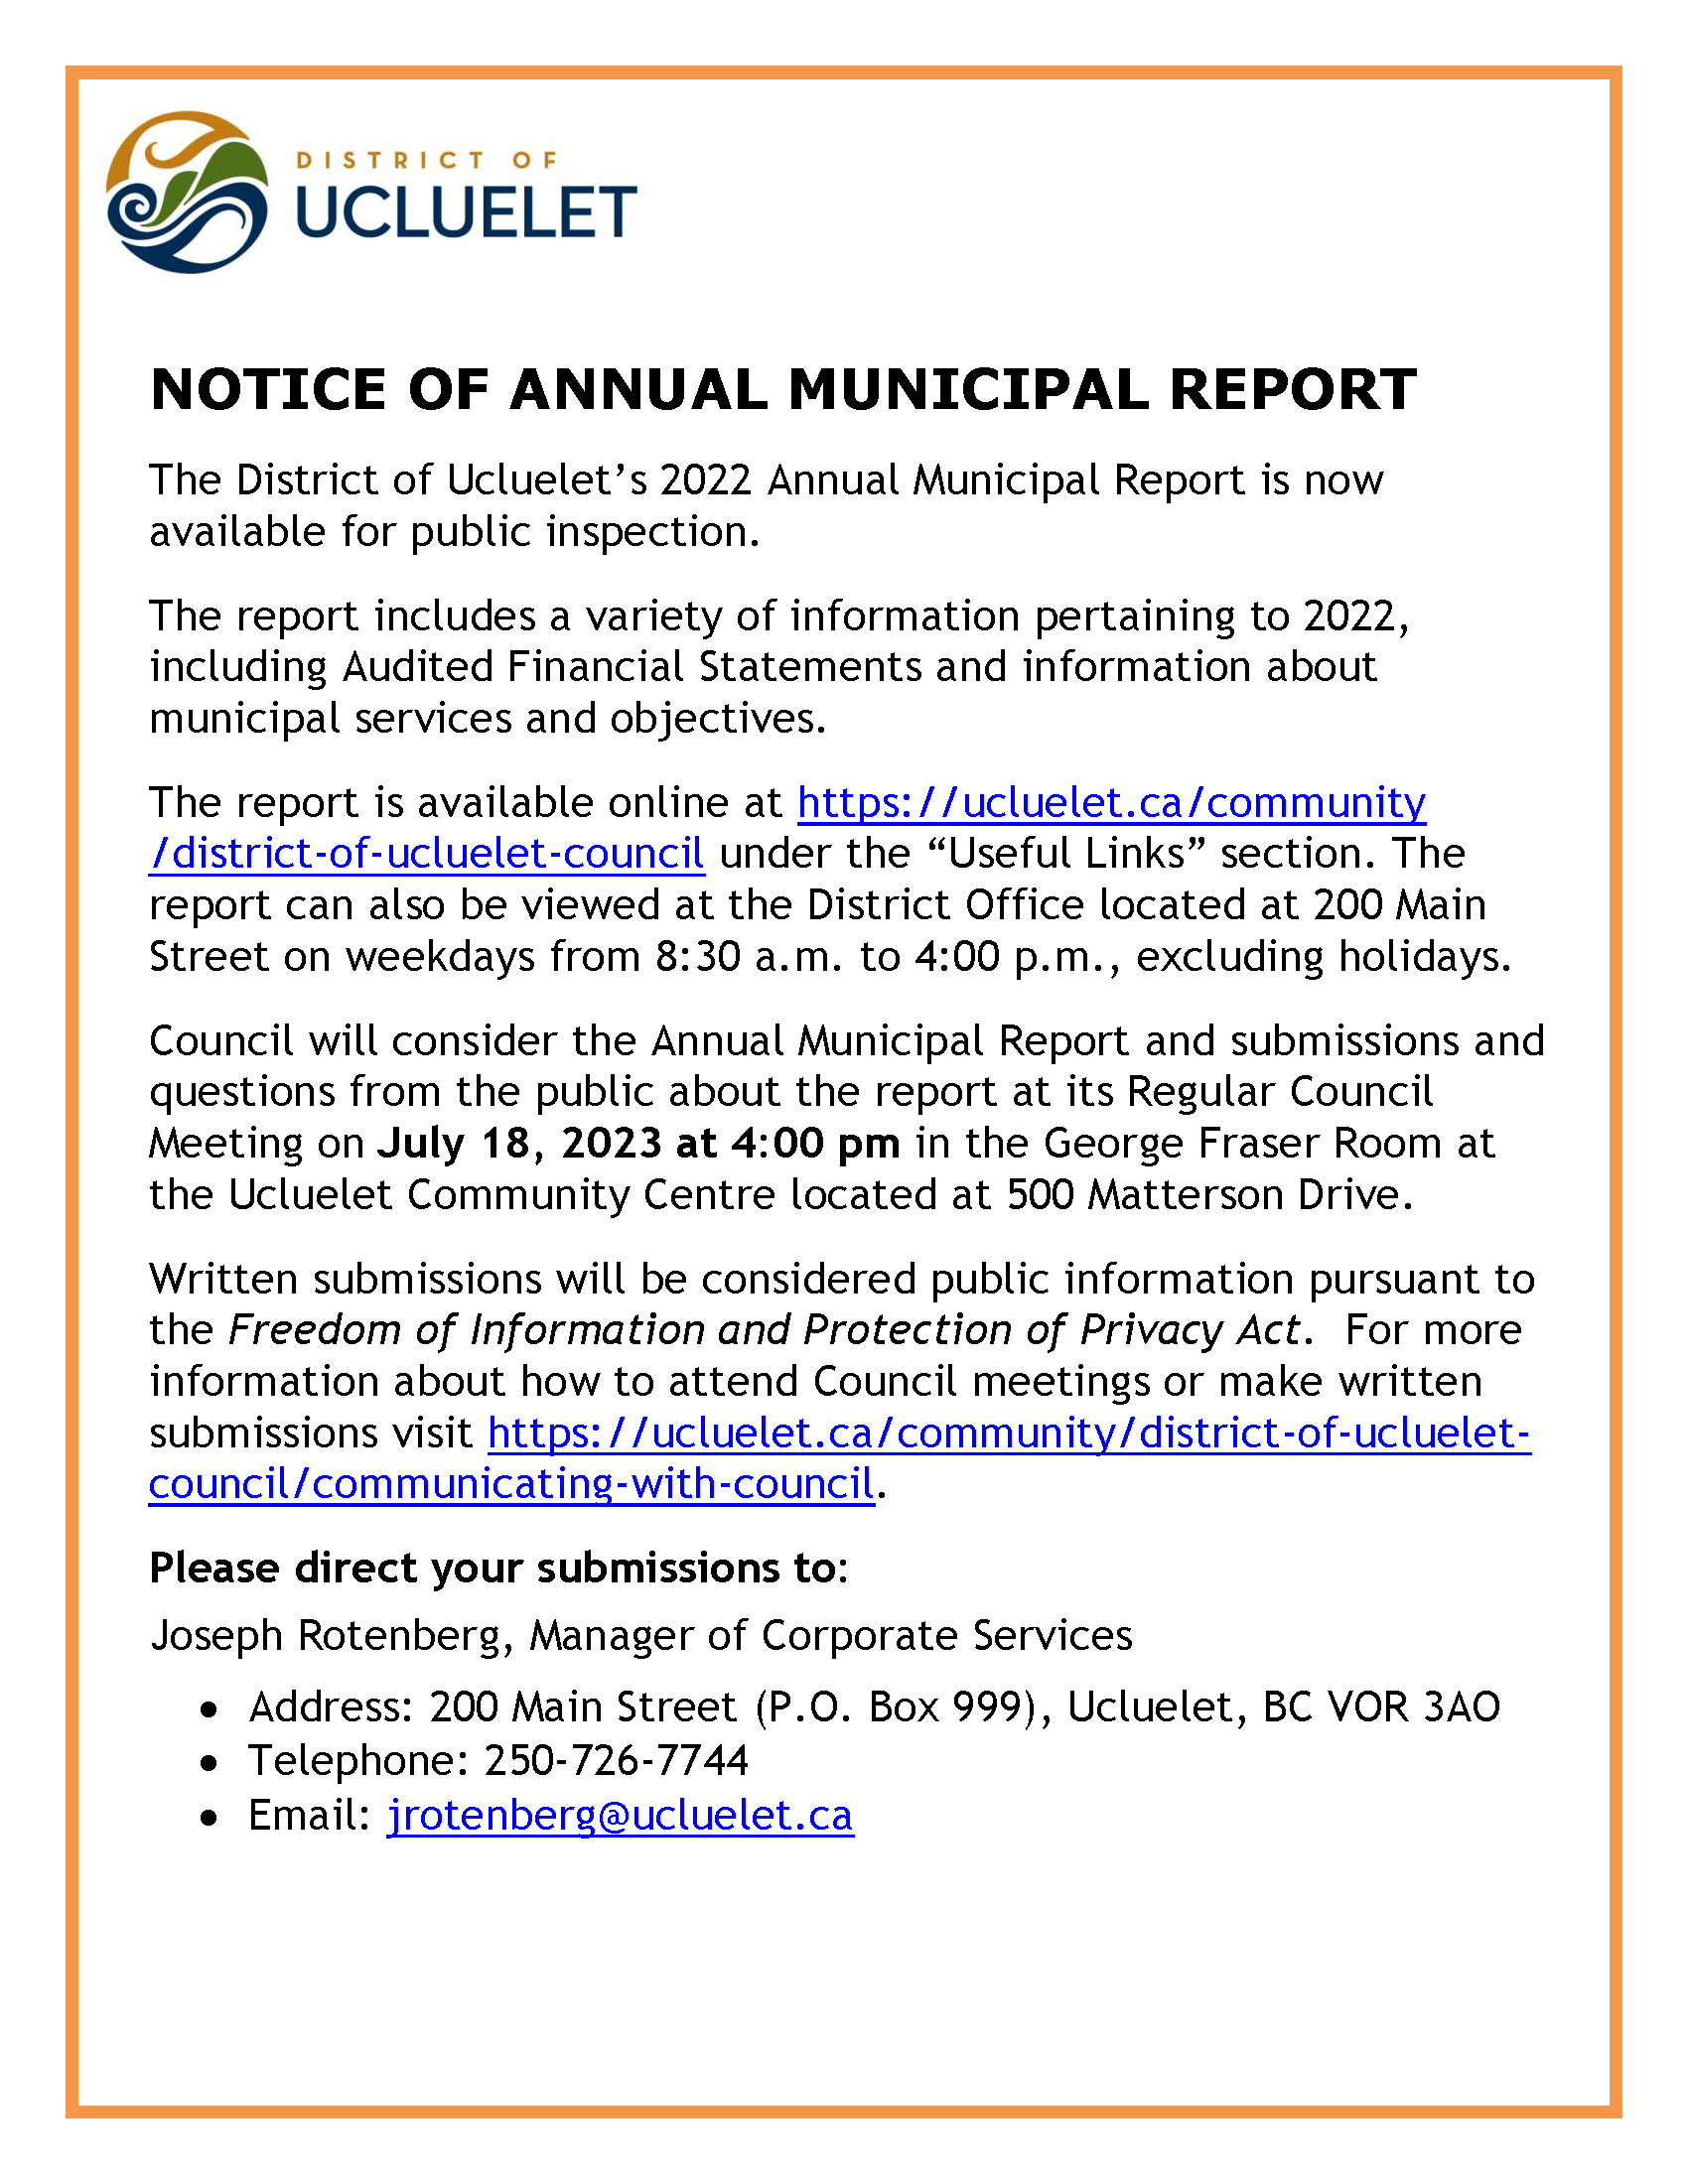 Westerly_Notice_of_Annual_Report_2022.png